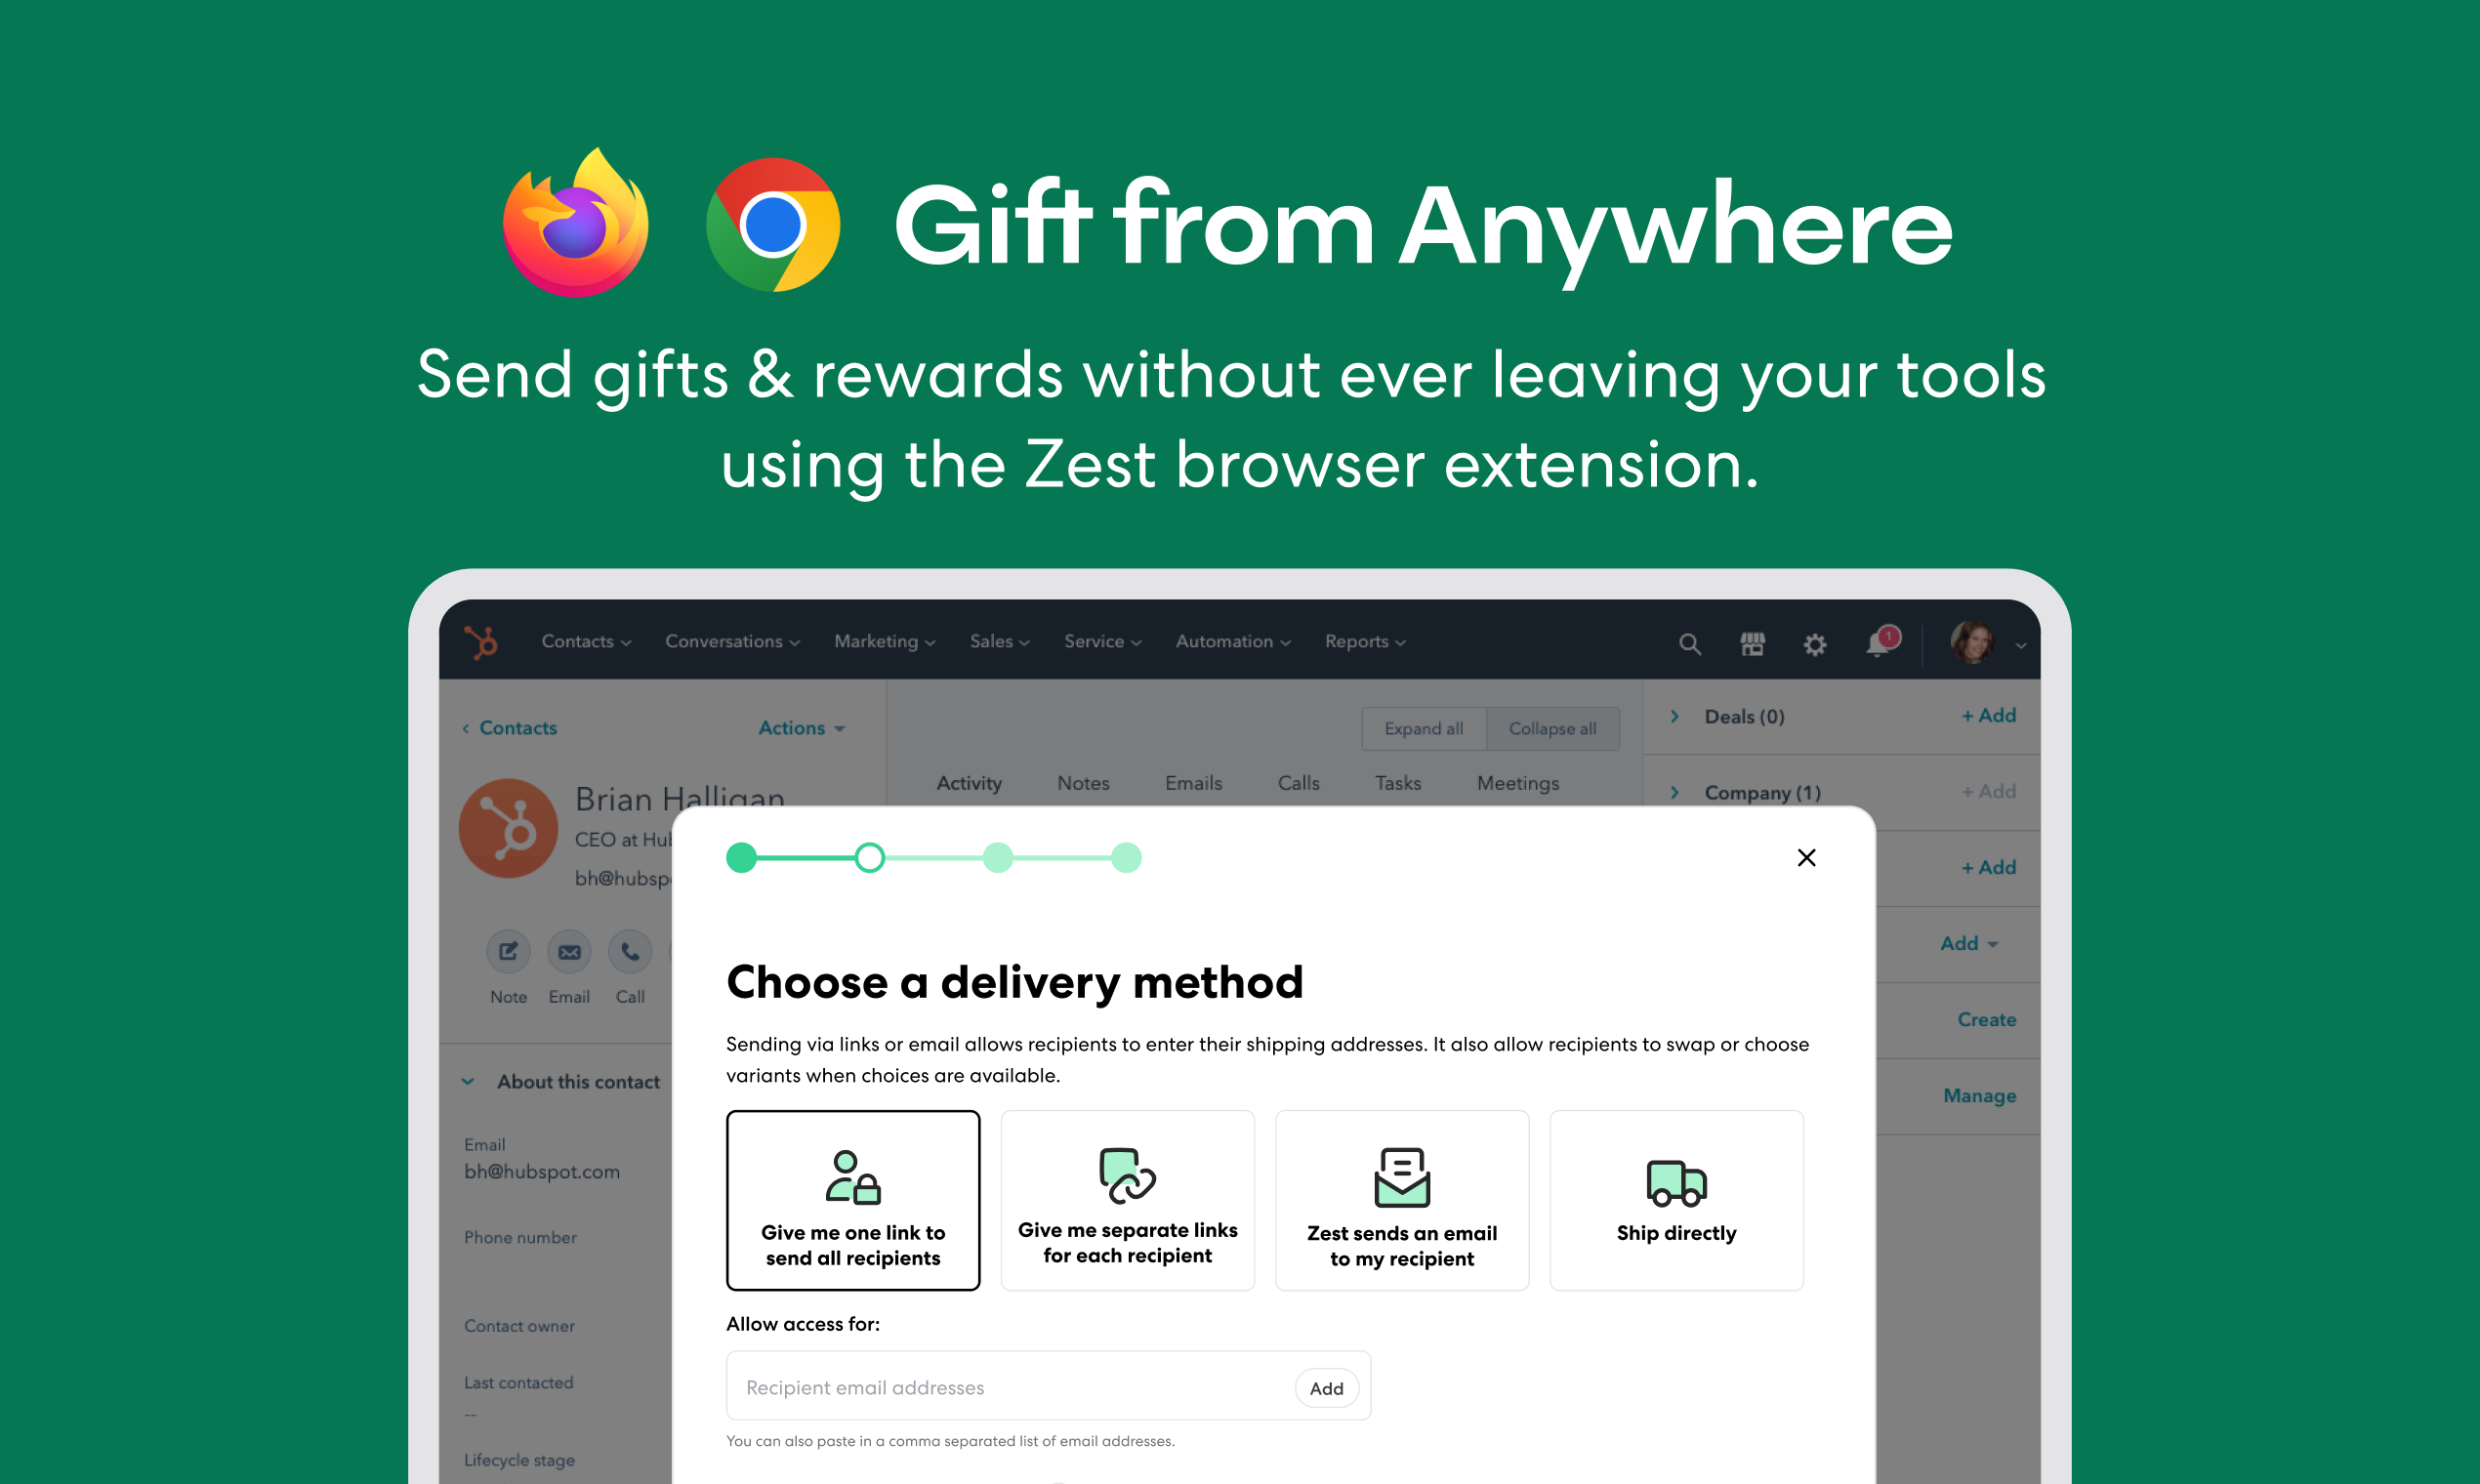 Zest - Gift from anywhere